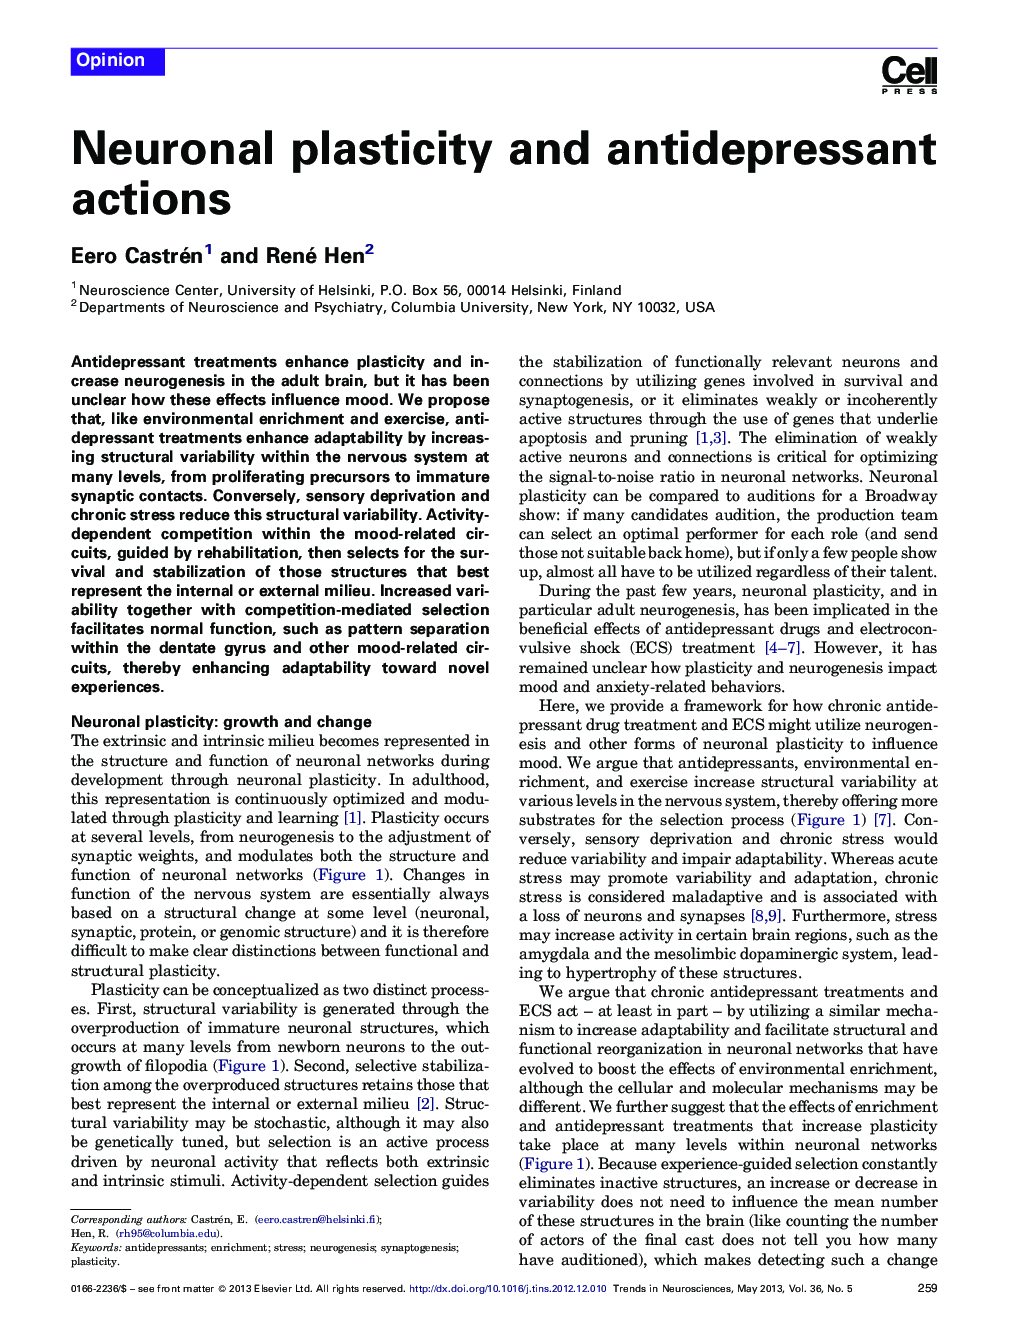 Neuronal plasticity and antidepressant actions